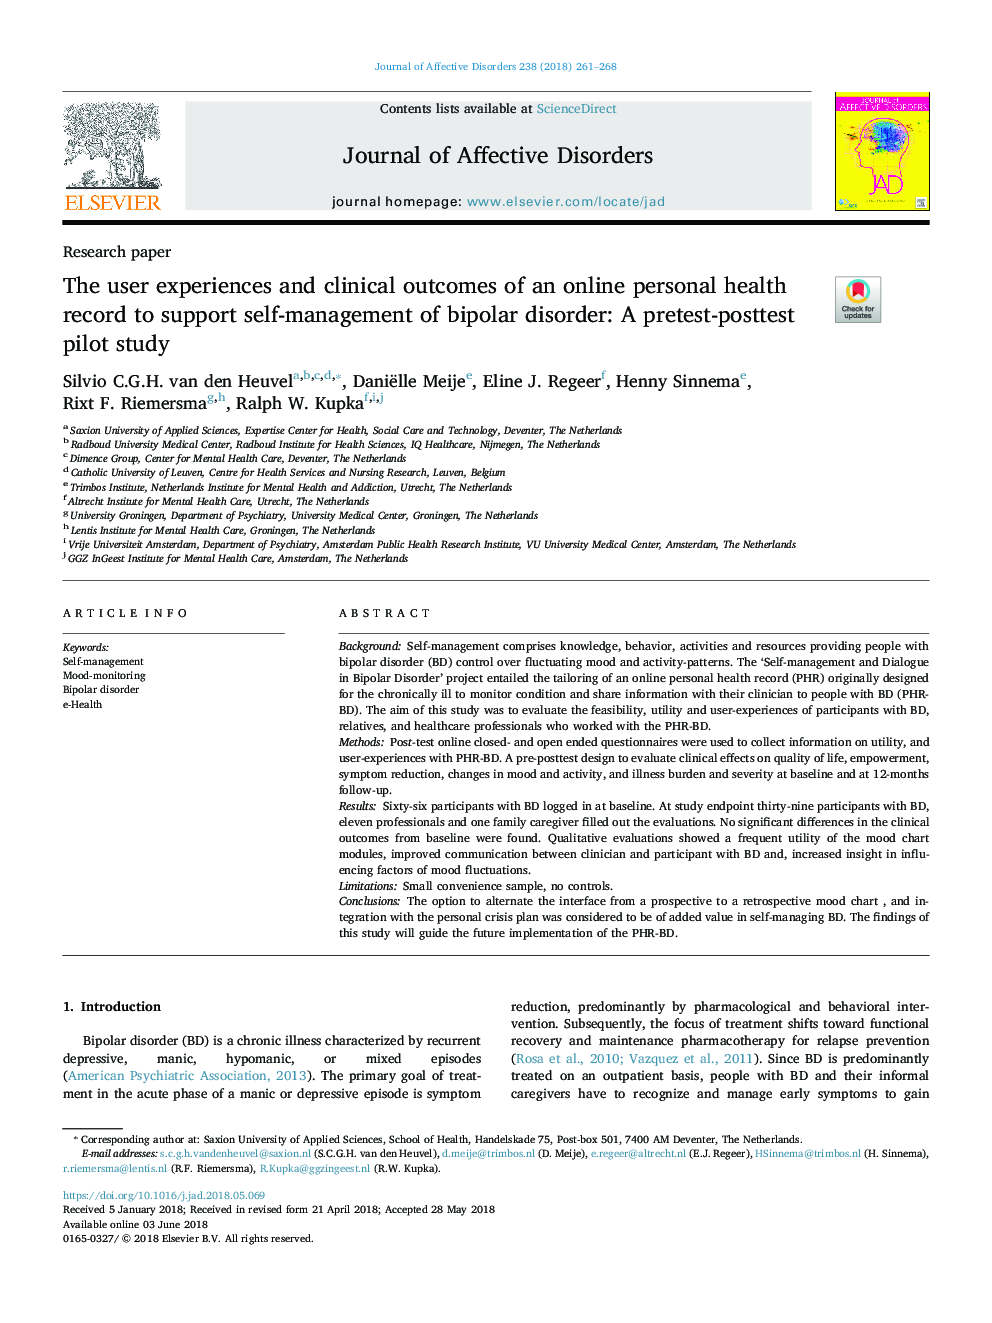 The user experiences and clinical outcomes of an online personal health record to support self-management of bipolar disorder: A pretest-posttest pilot study